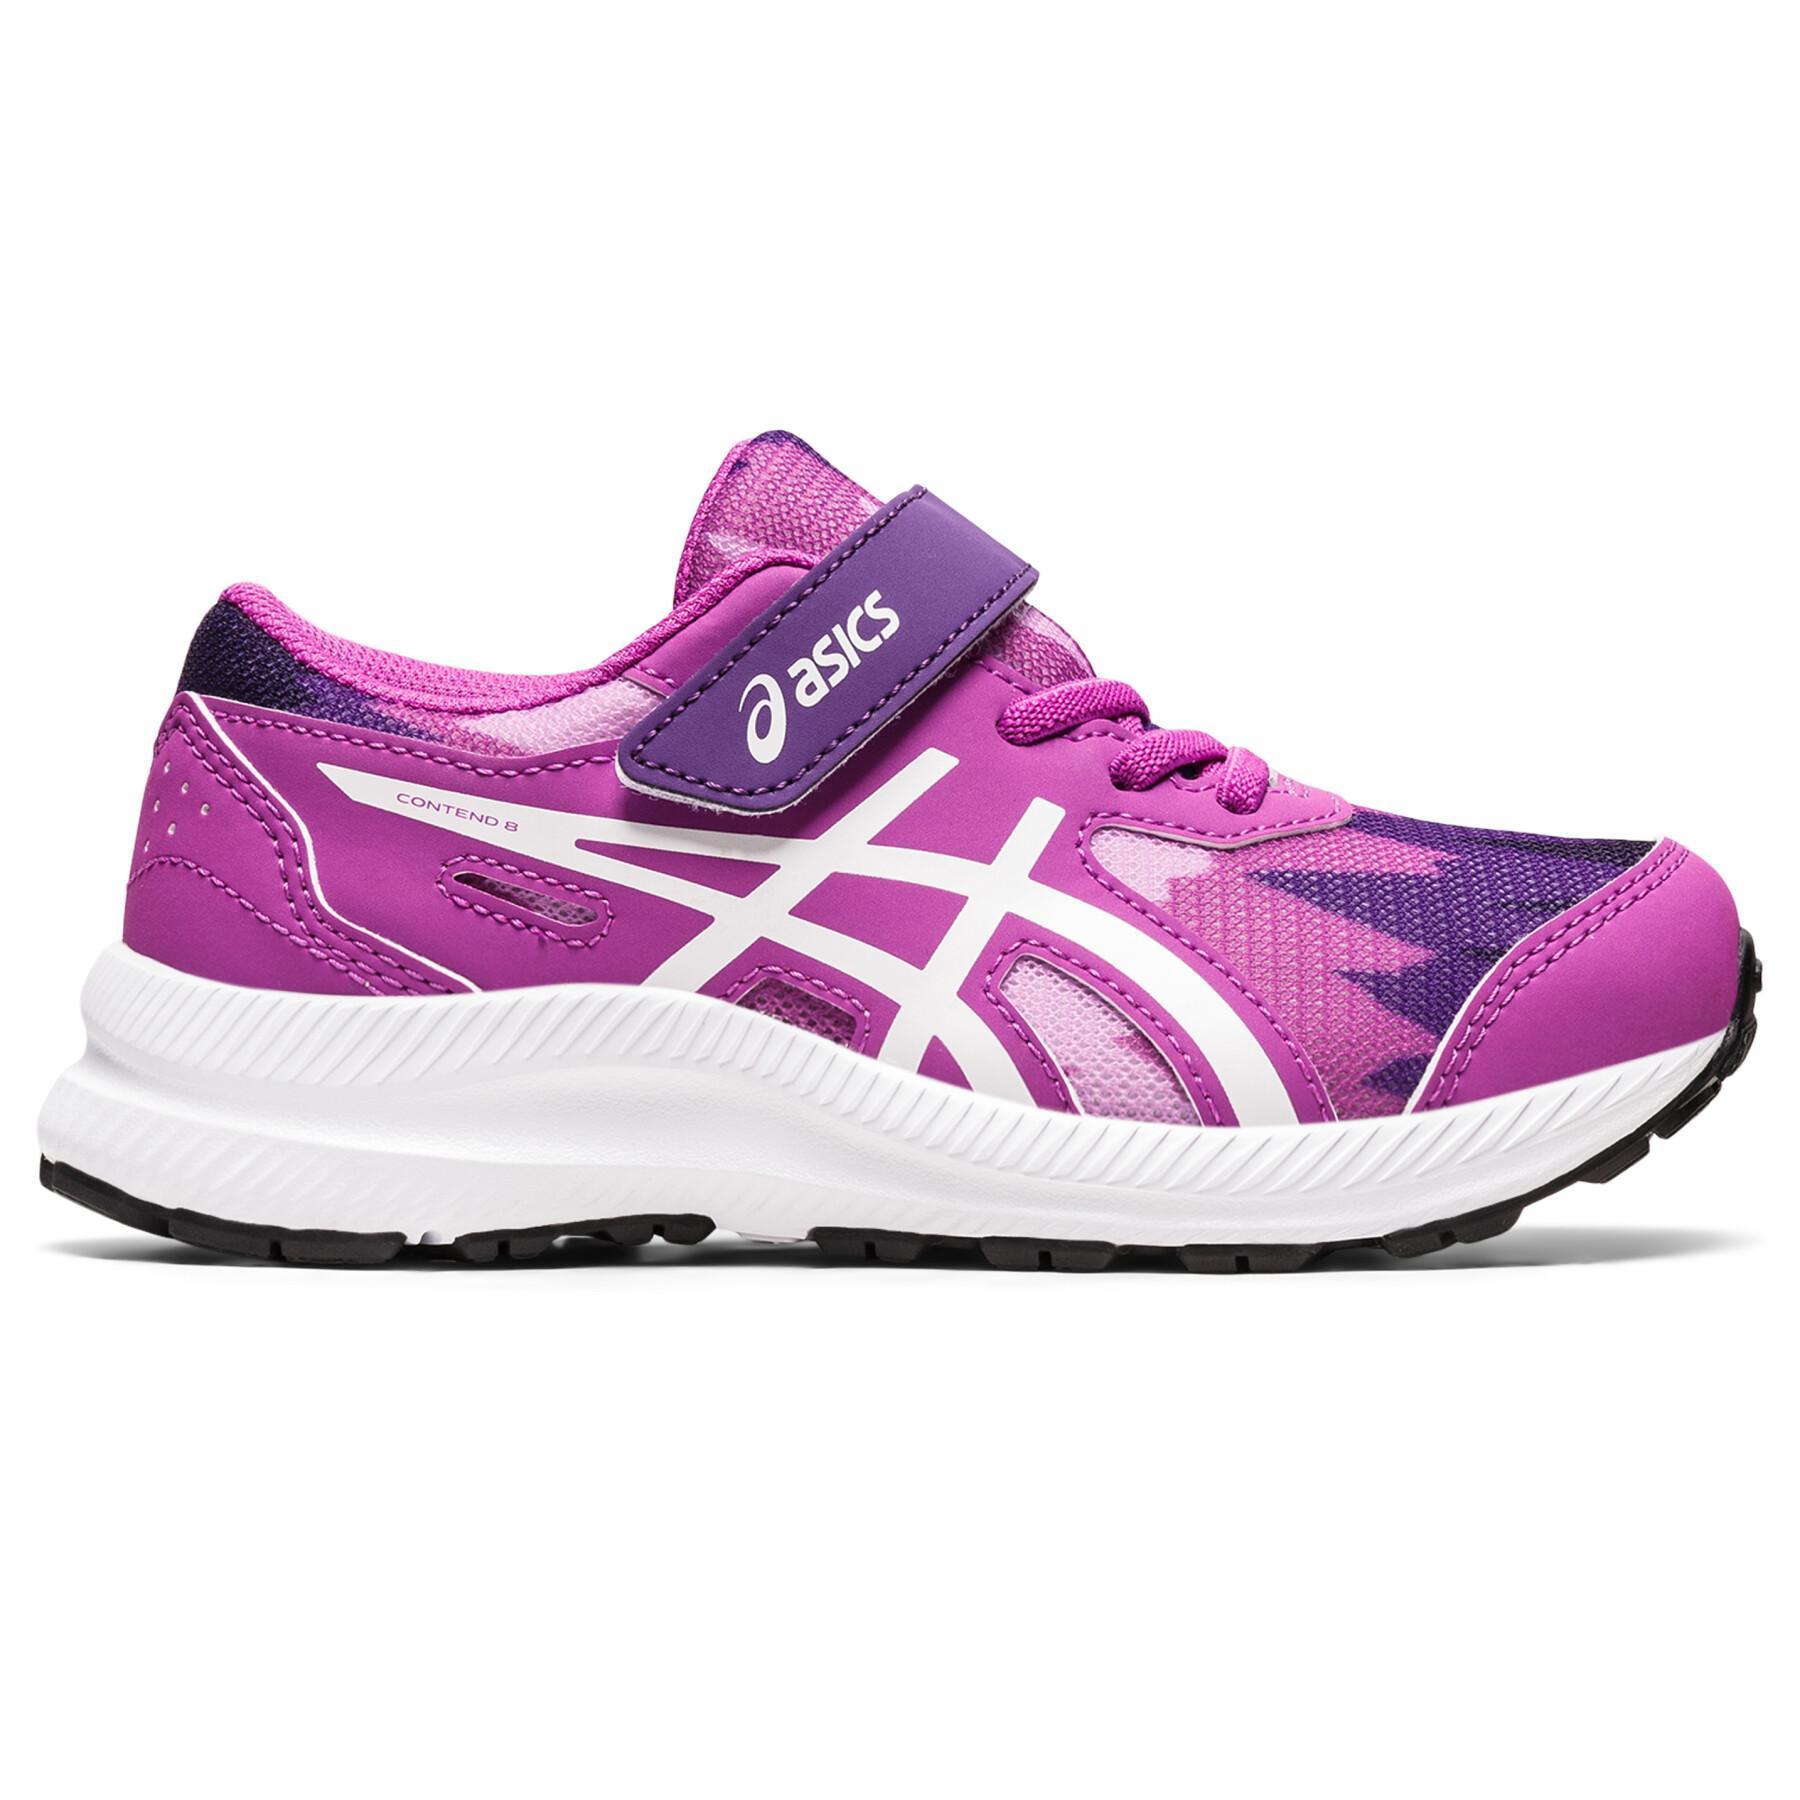 Children's running shoes Asics Contend 8 Ps - Gift Cards - Junior